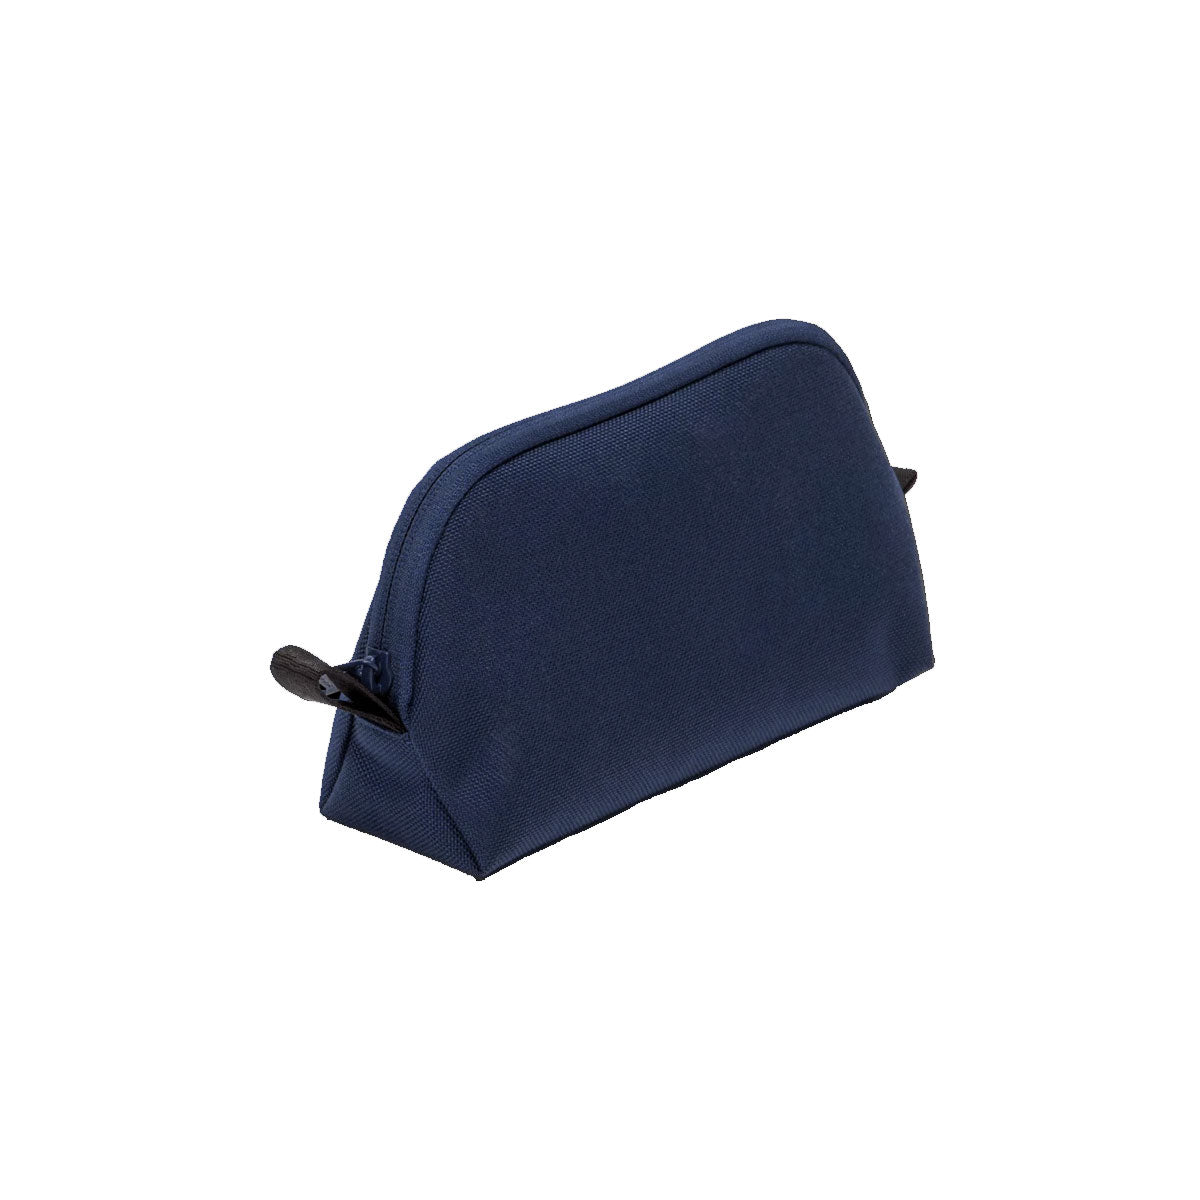 Able Carry : The Daily Stash Pouch : Cordura Navy